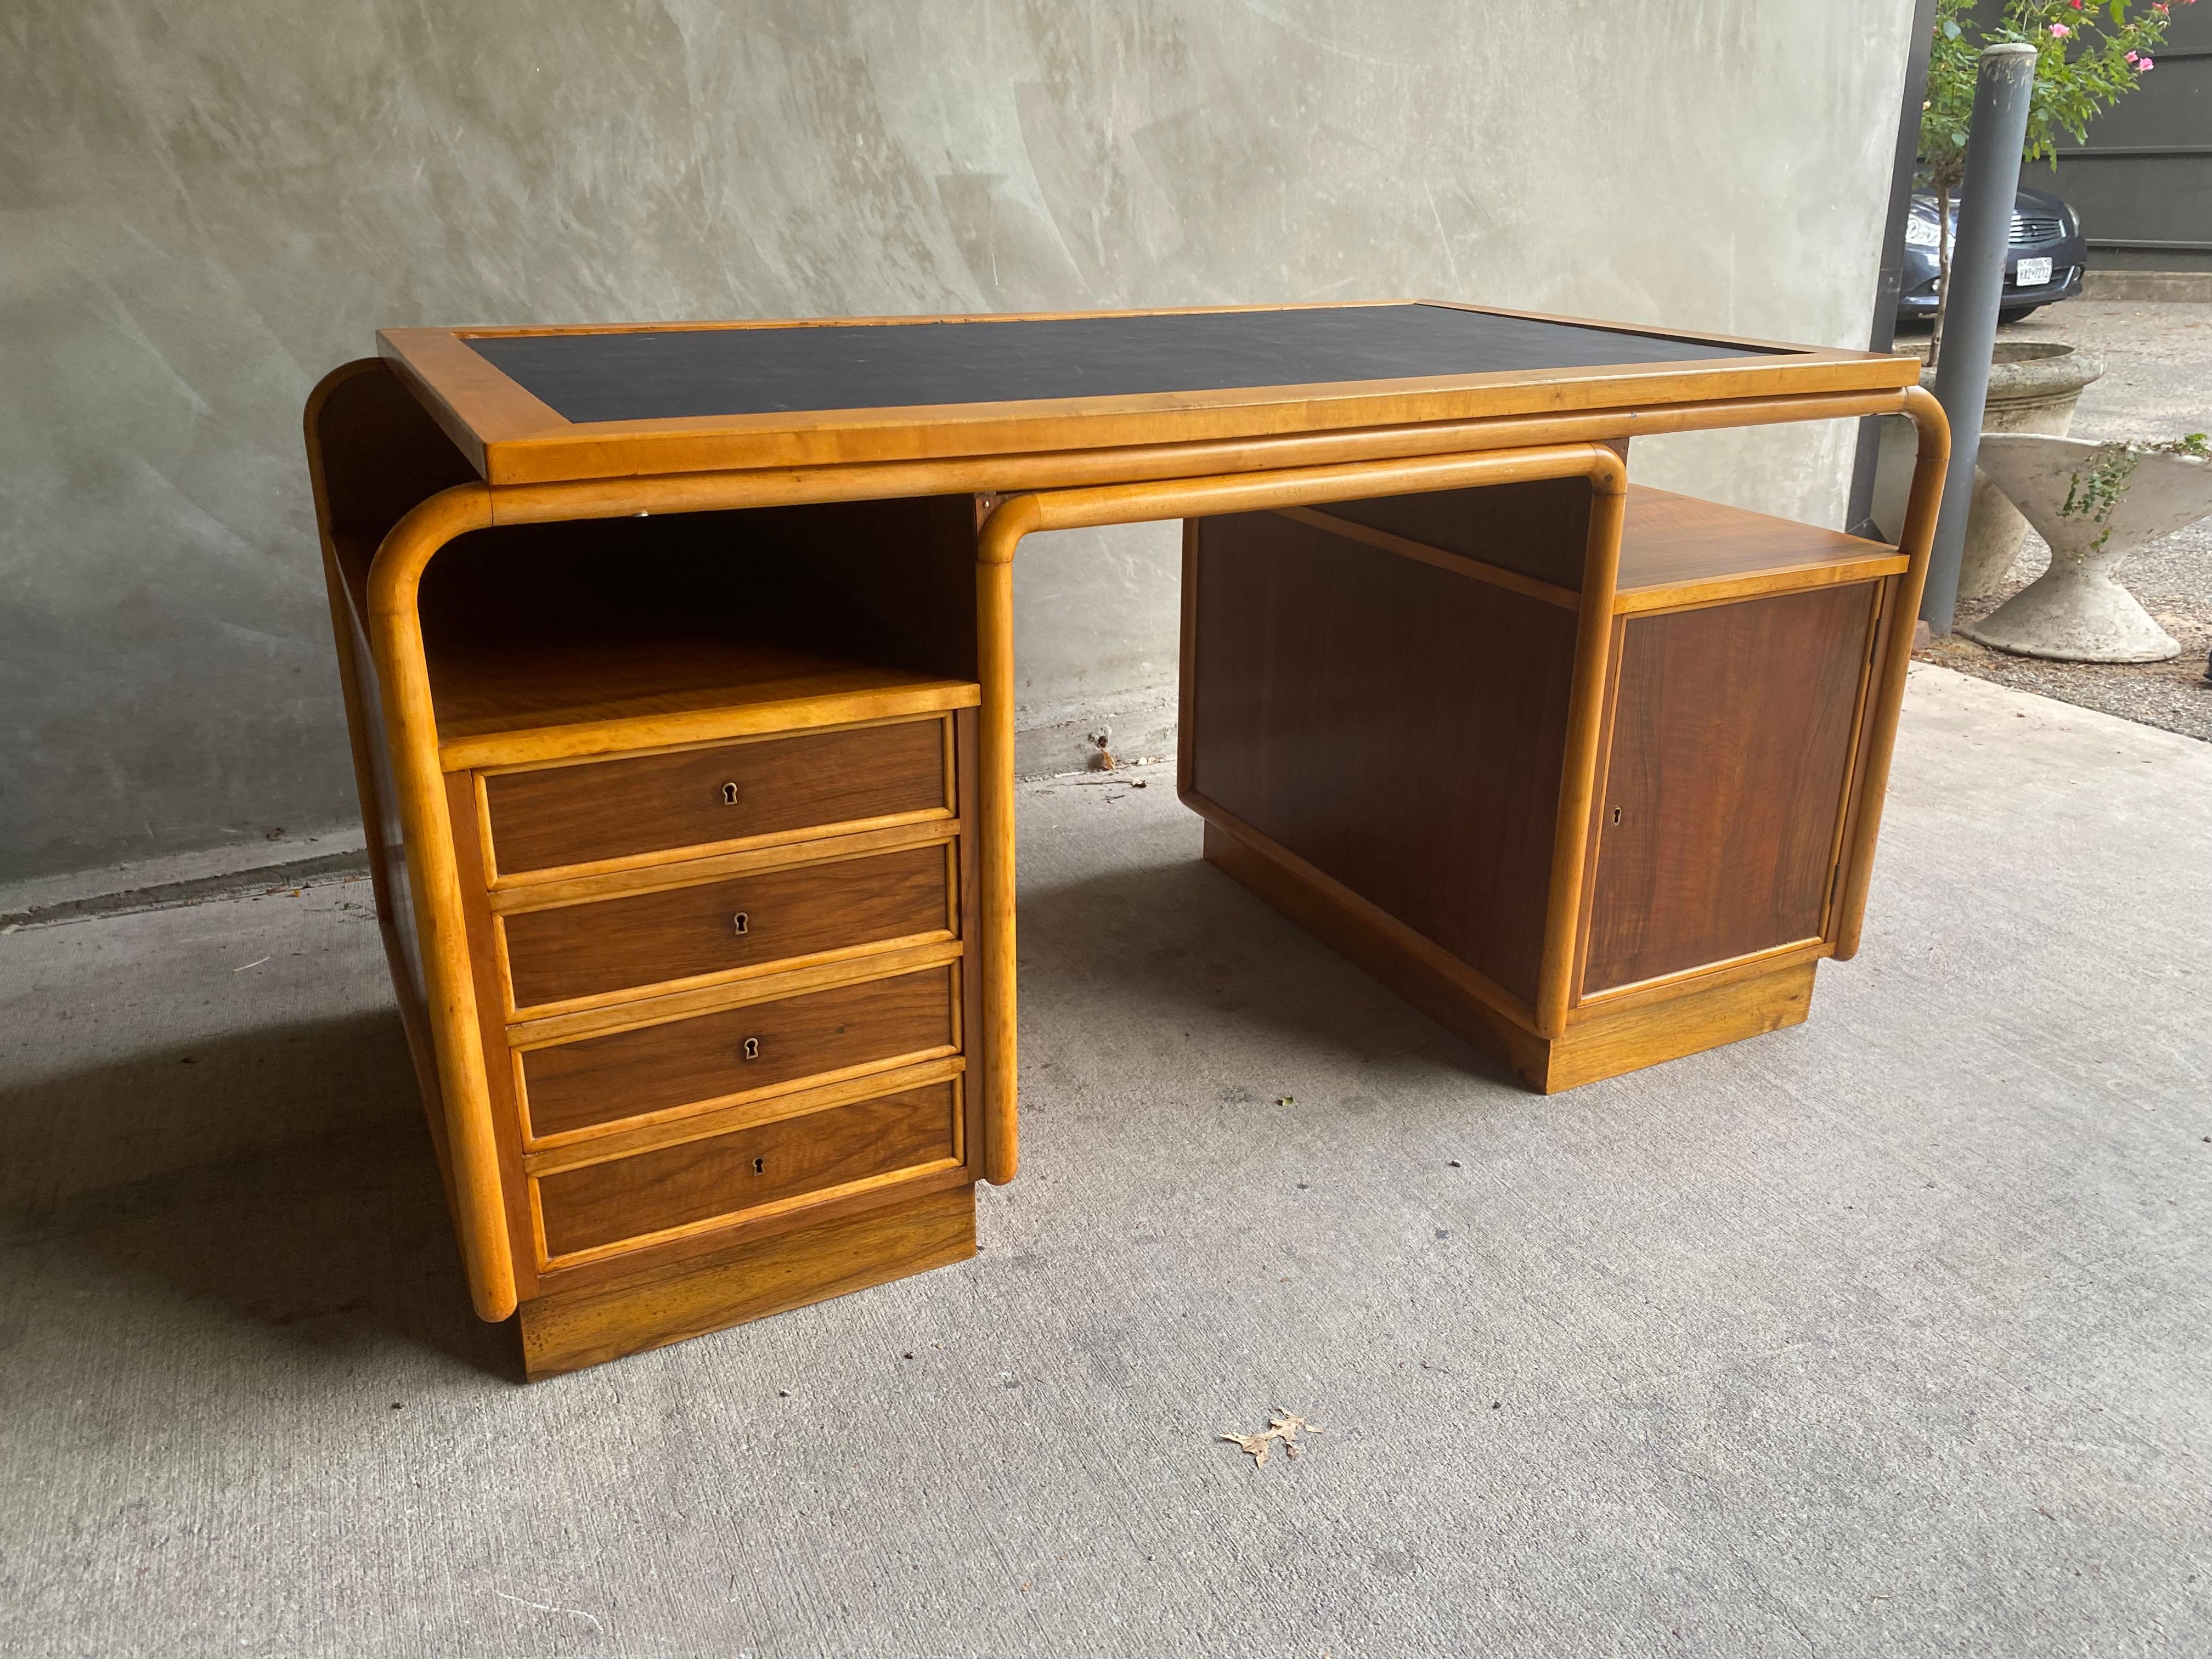 Bauhaus era kneehole desk with Thonet style bentwood frame. Solid maple trim with inset panels of book matched European walnut veneer. Finished on all sides with inset faux ink black leather writing blotter surface. Eastern Europe, 1930's.